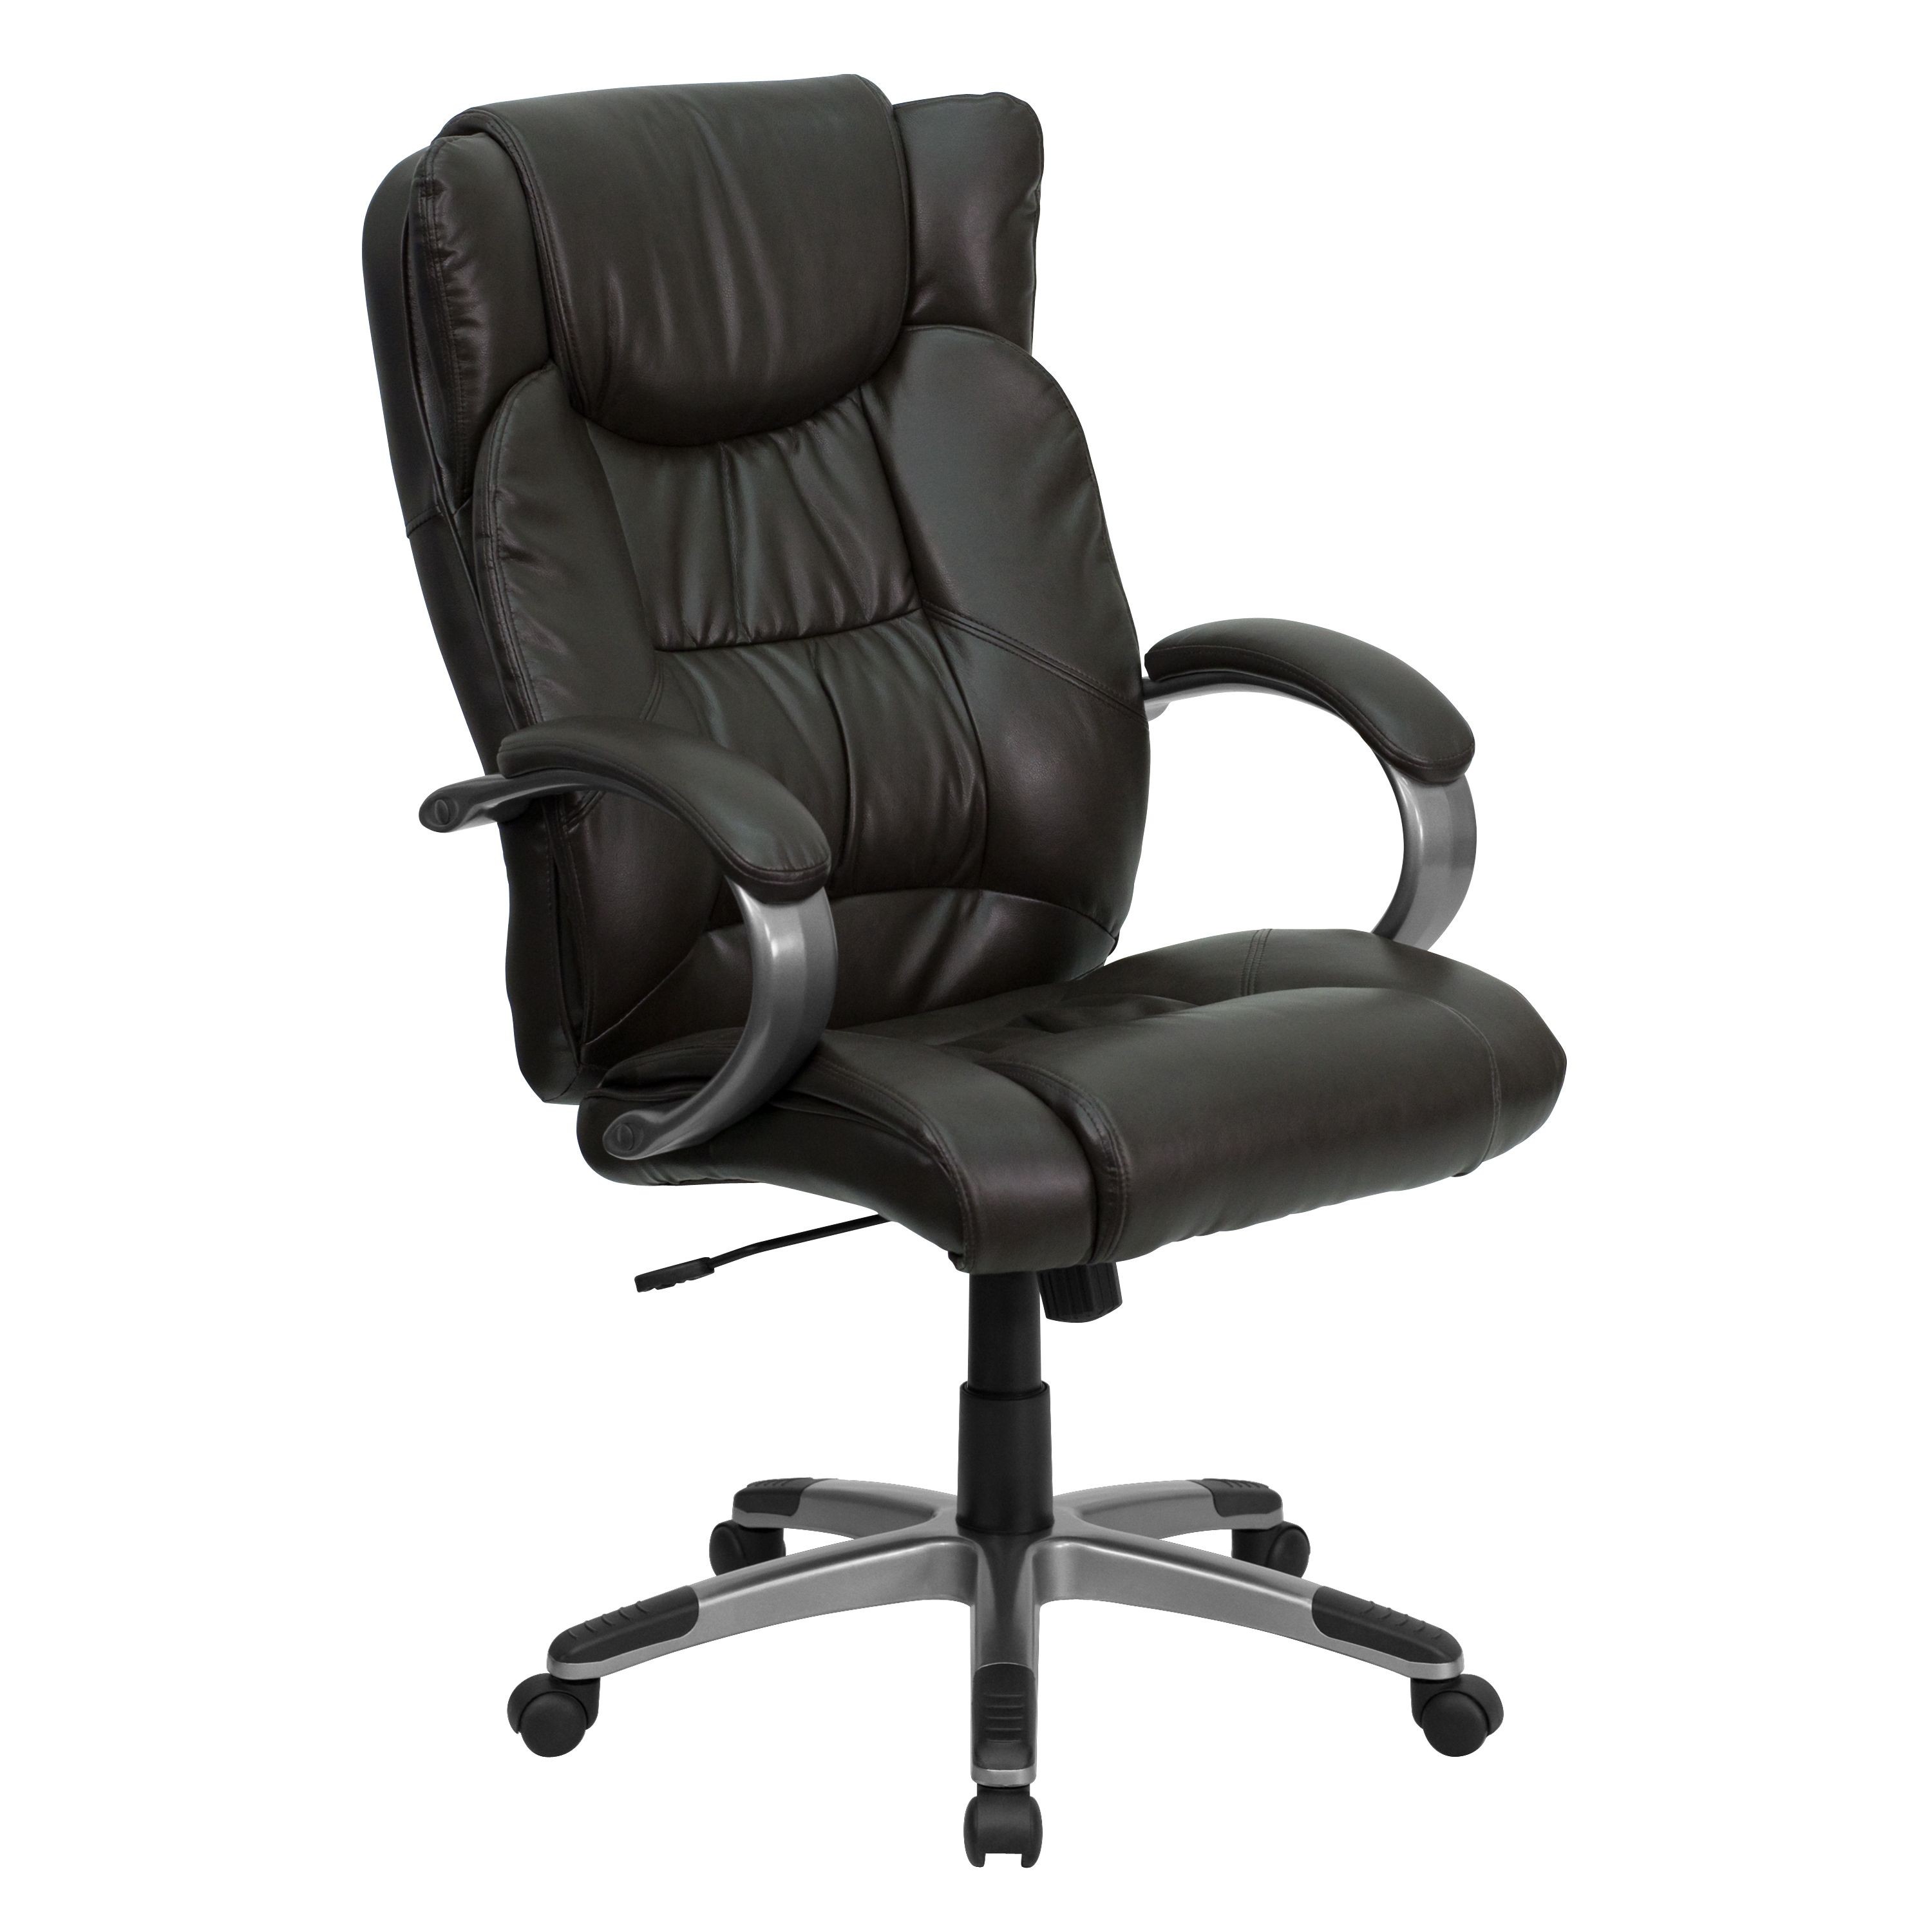 Flash Furniture BT-9088-BRN-GG Espresso Brown Leather High Back Executive Office Chair, with padded loop arms